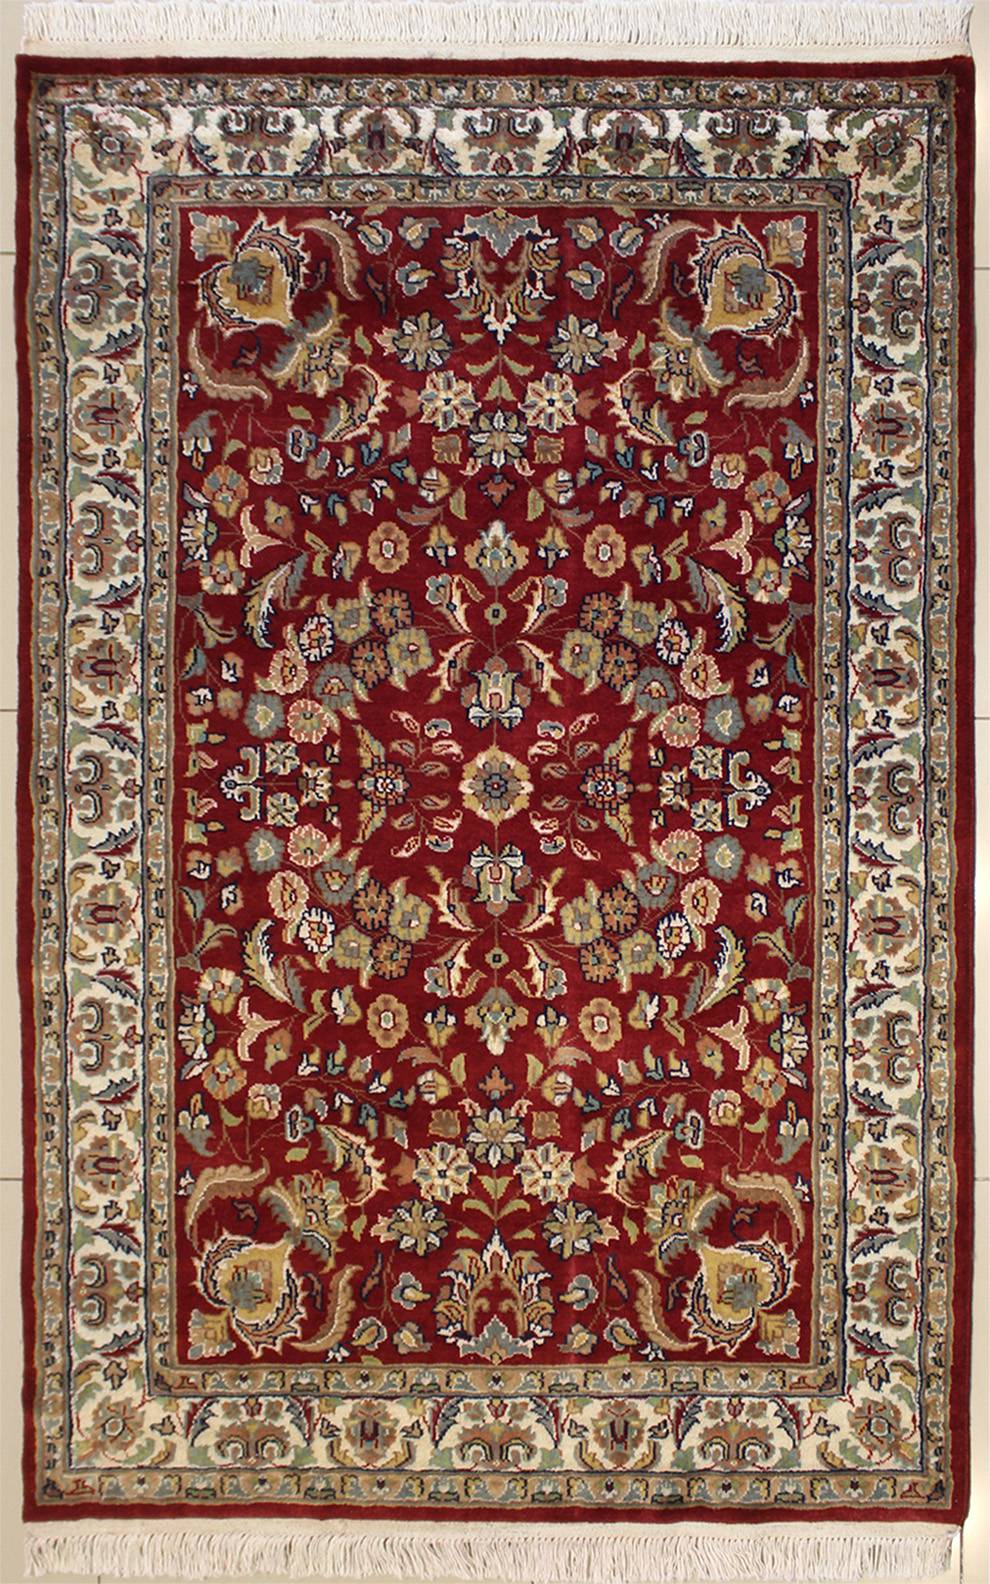 Floral Design a 4x6 Rectangular Rug RugsTC 3'11 x 5'8 Pak Persian Area Rug with Wool Pile 100% Original Hand-Knotted in Red,Beige,Grey Colors 